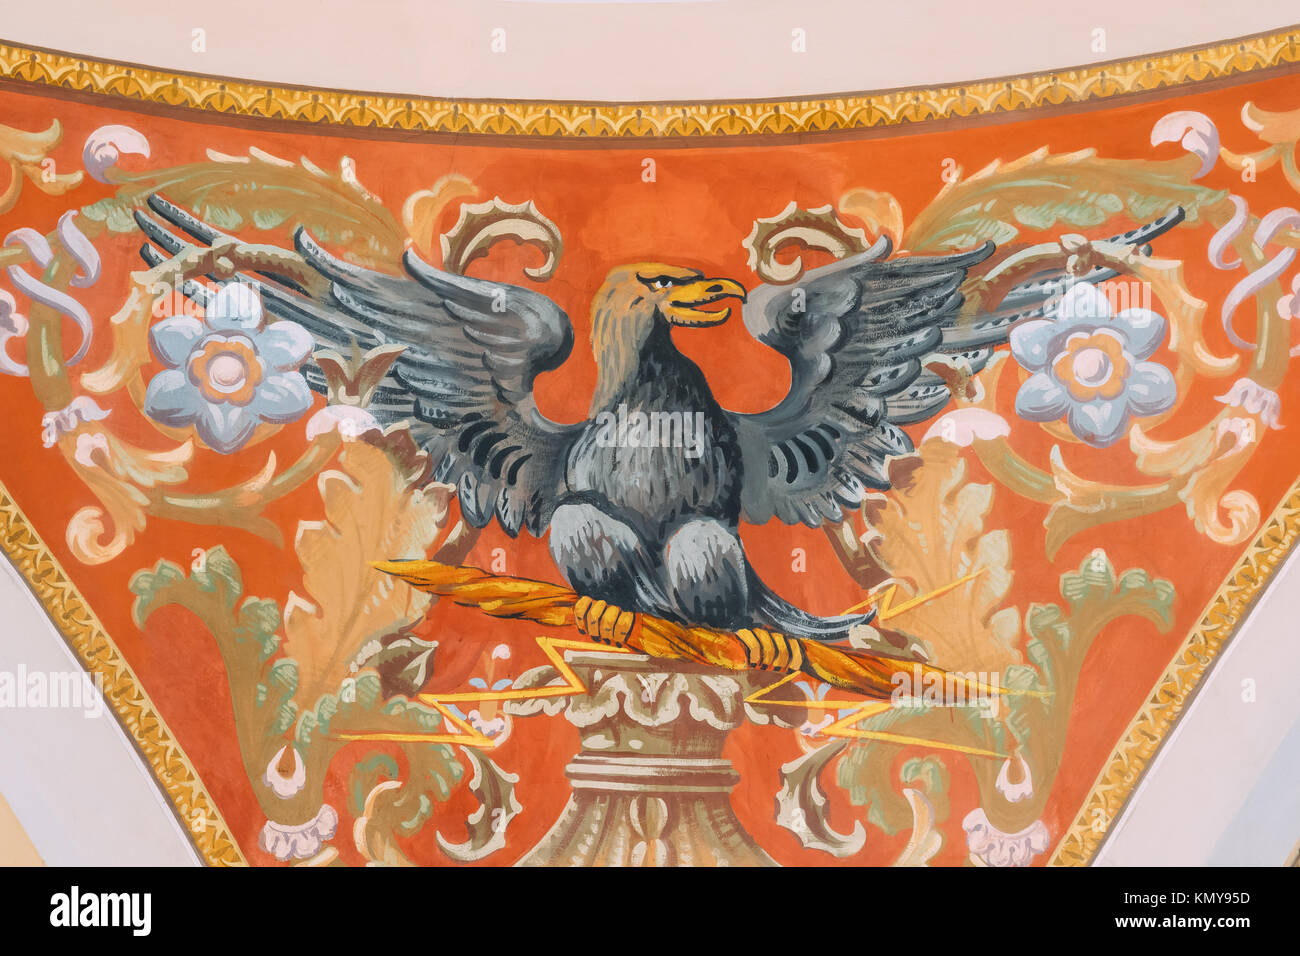 Helsinki, Finland. Art Painting Of Ceiling Of Dome Hall In The National Library Of Finland. Image Of Eagle Bird. Stock Photo